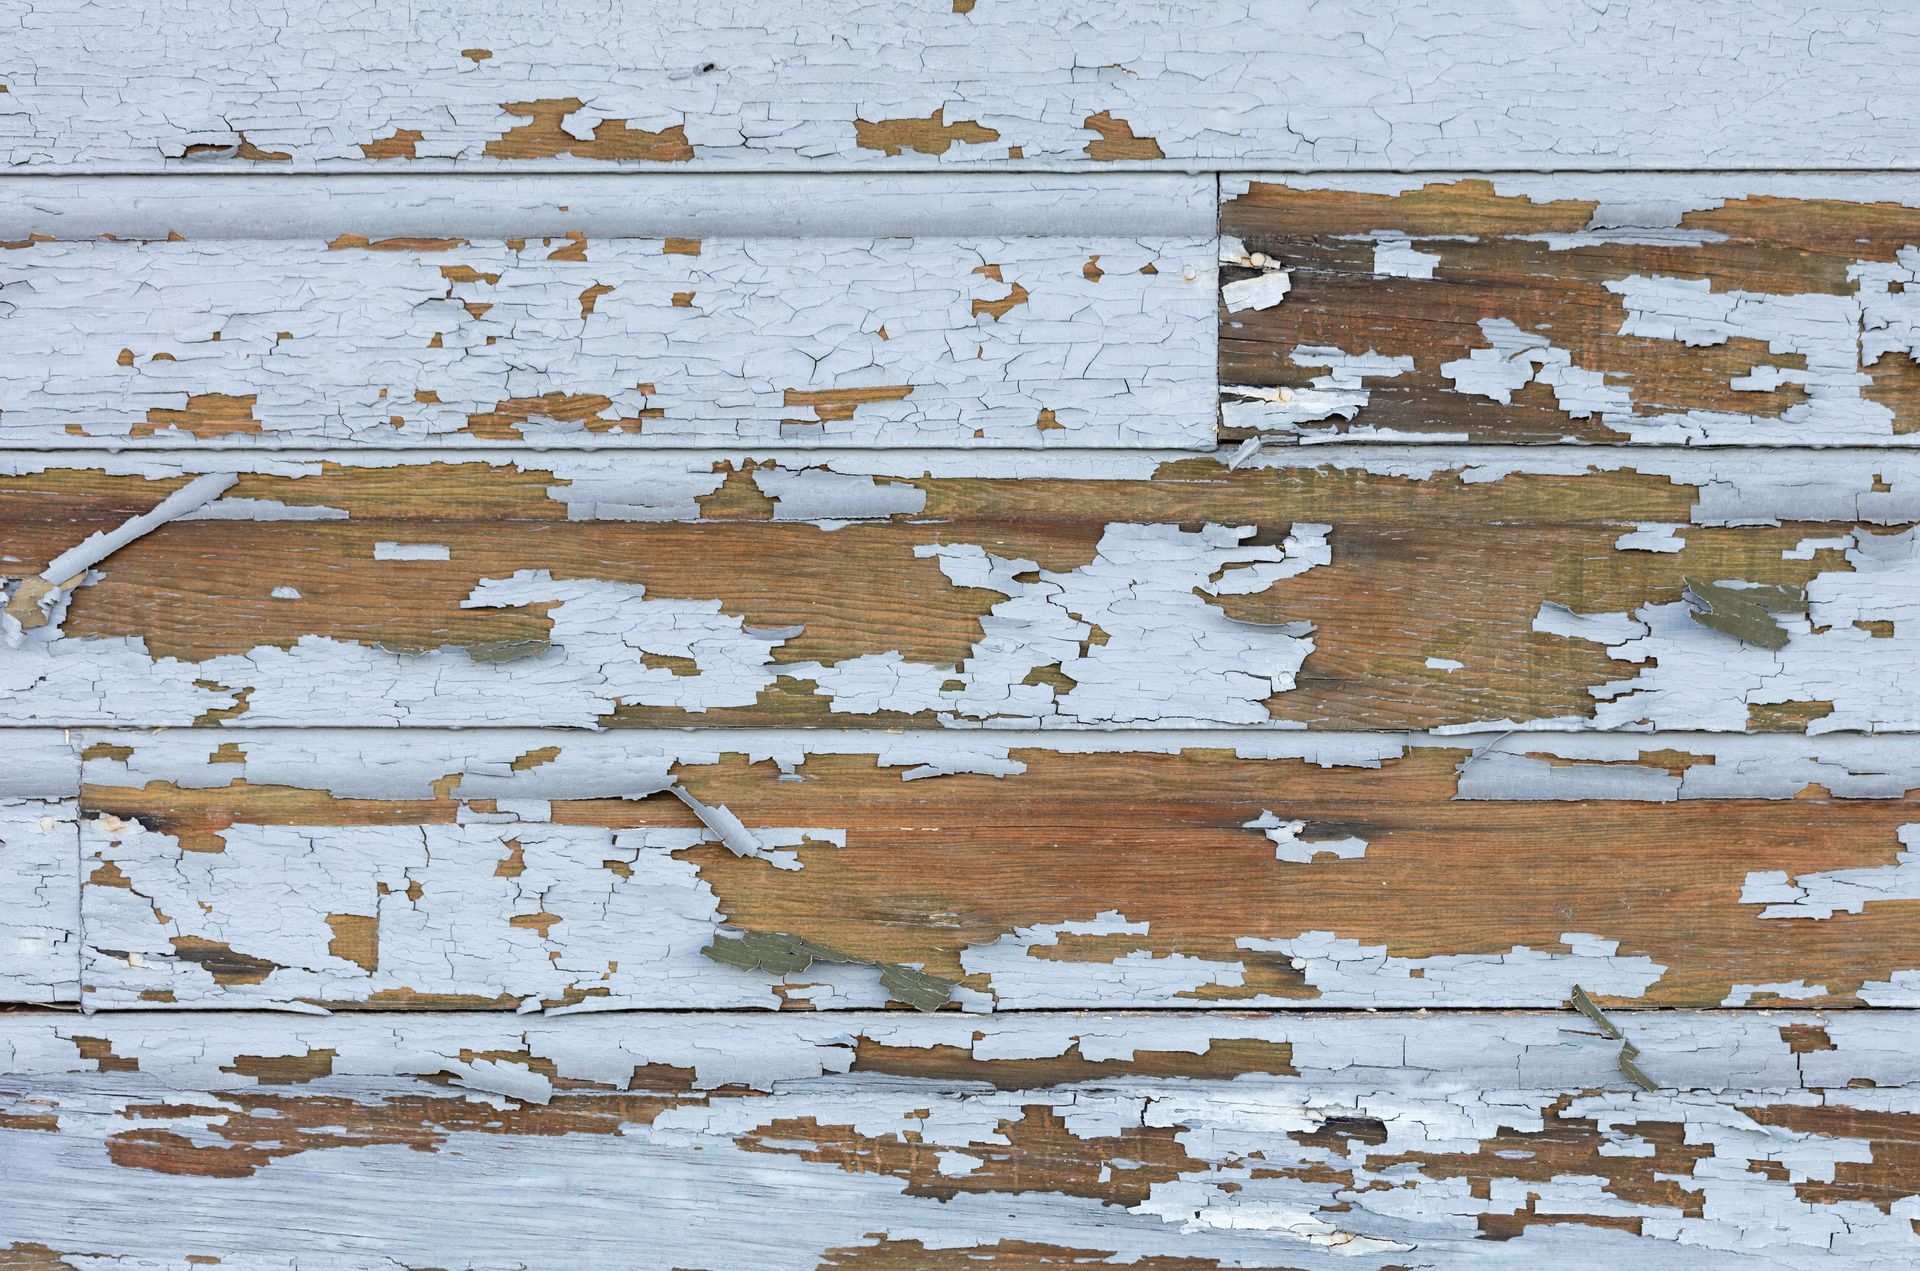 A close up of a wooden surface with peeling paint